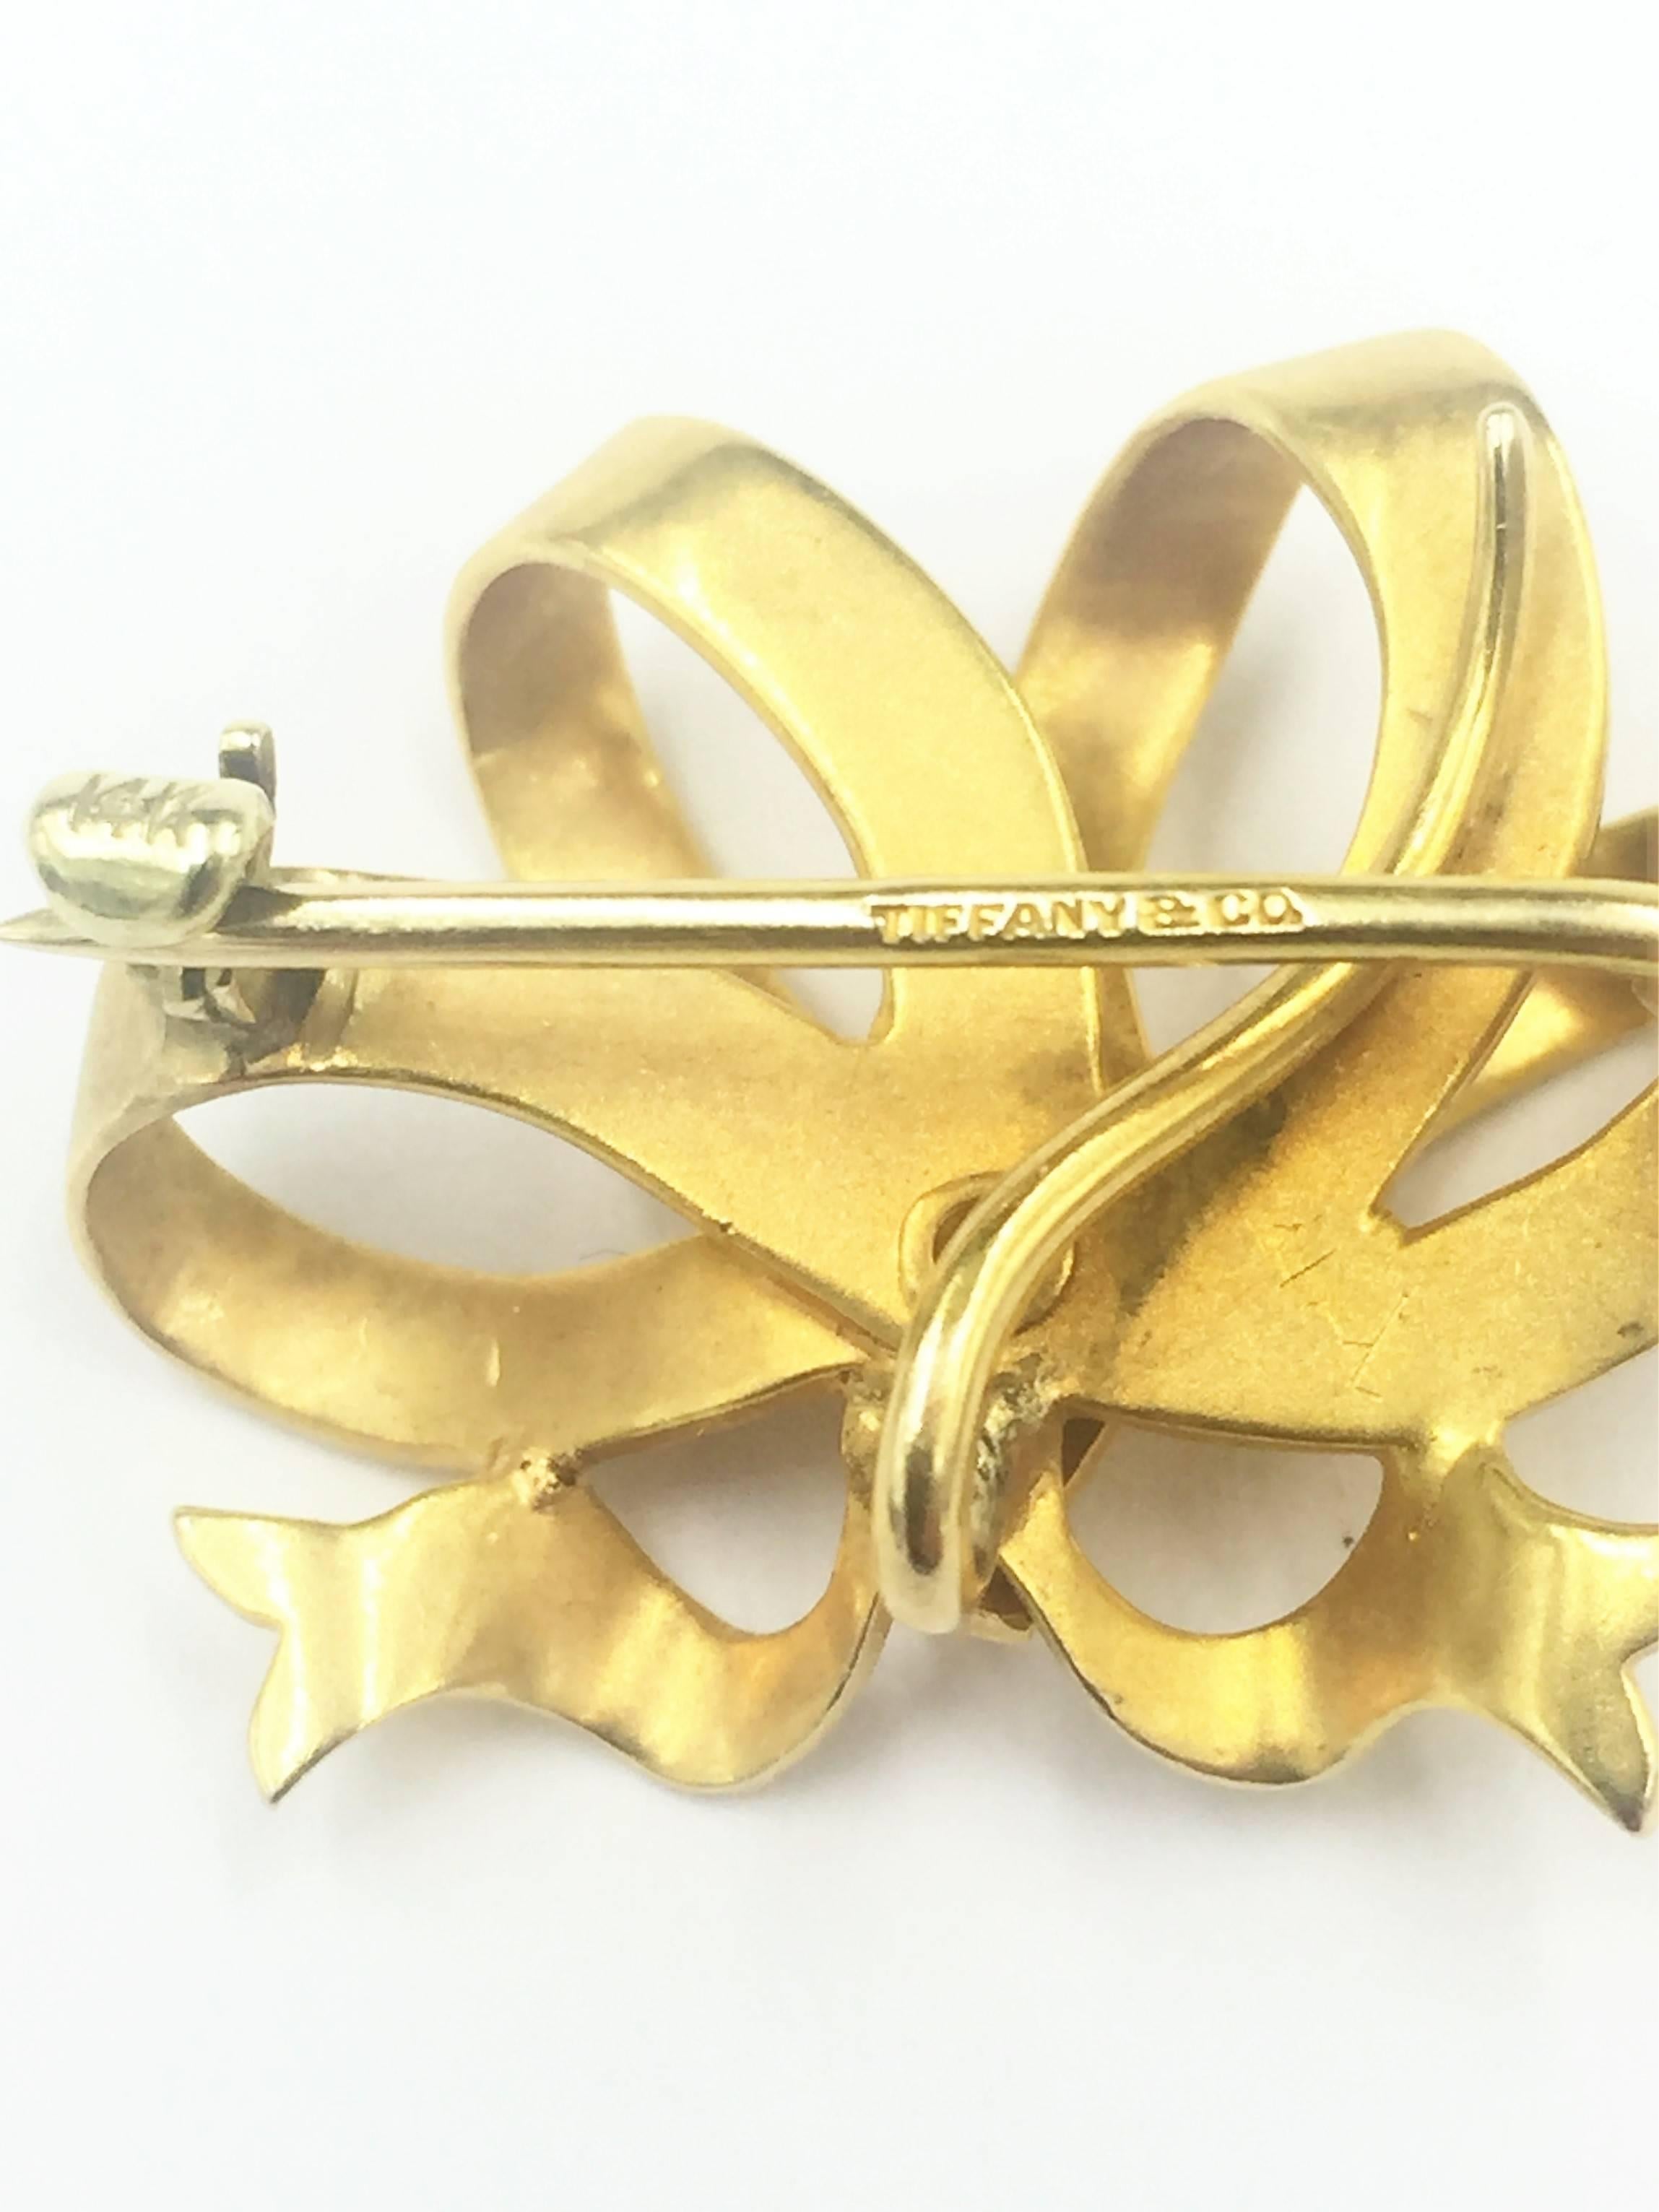 This absolutely adorable Tiffany & Co. signed bow pin, brooch, and pendant is the perfect affordable purchase for the customer that desires Tiffany & Co. quality with simplicity and contemporary design. This piece is too cute and would make a great